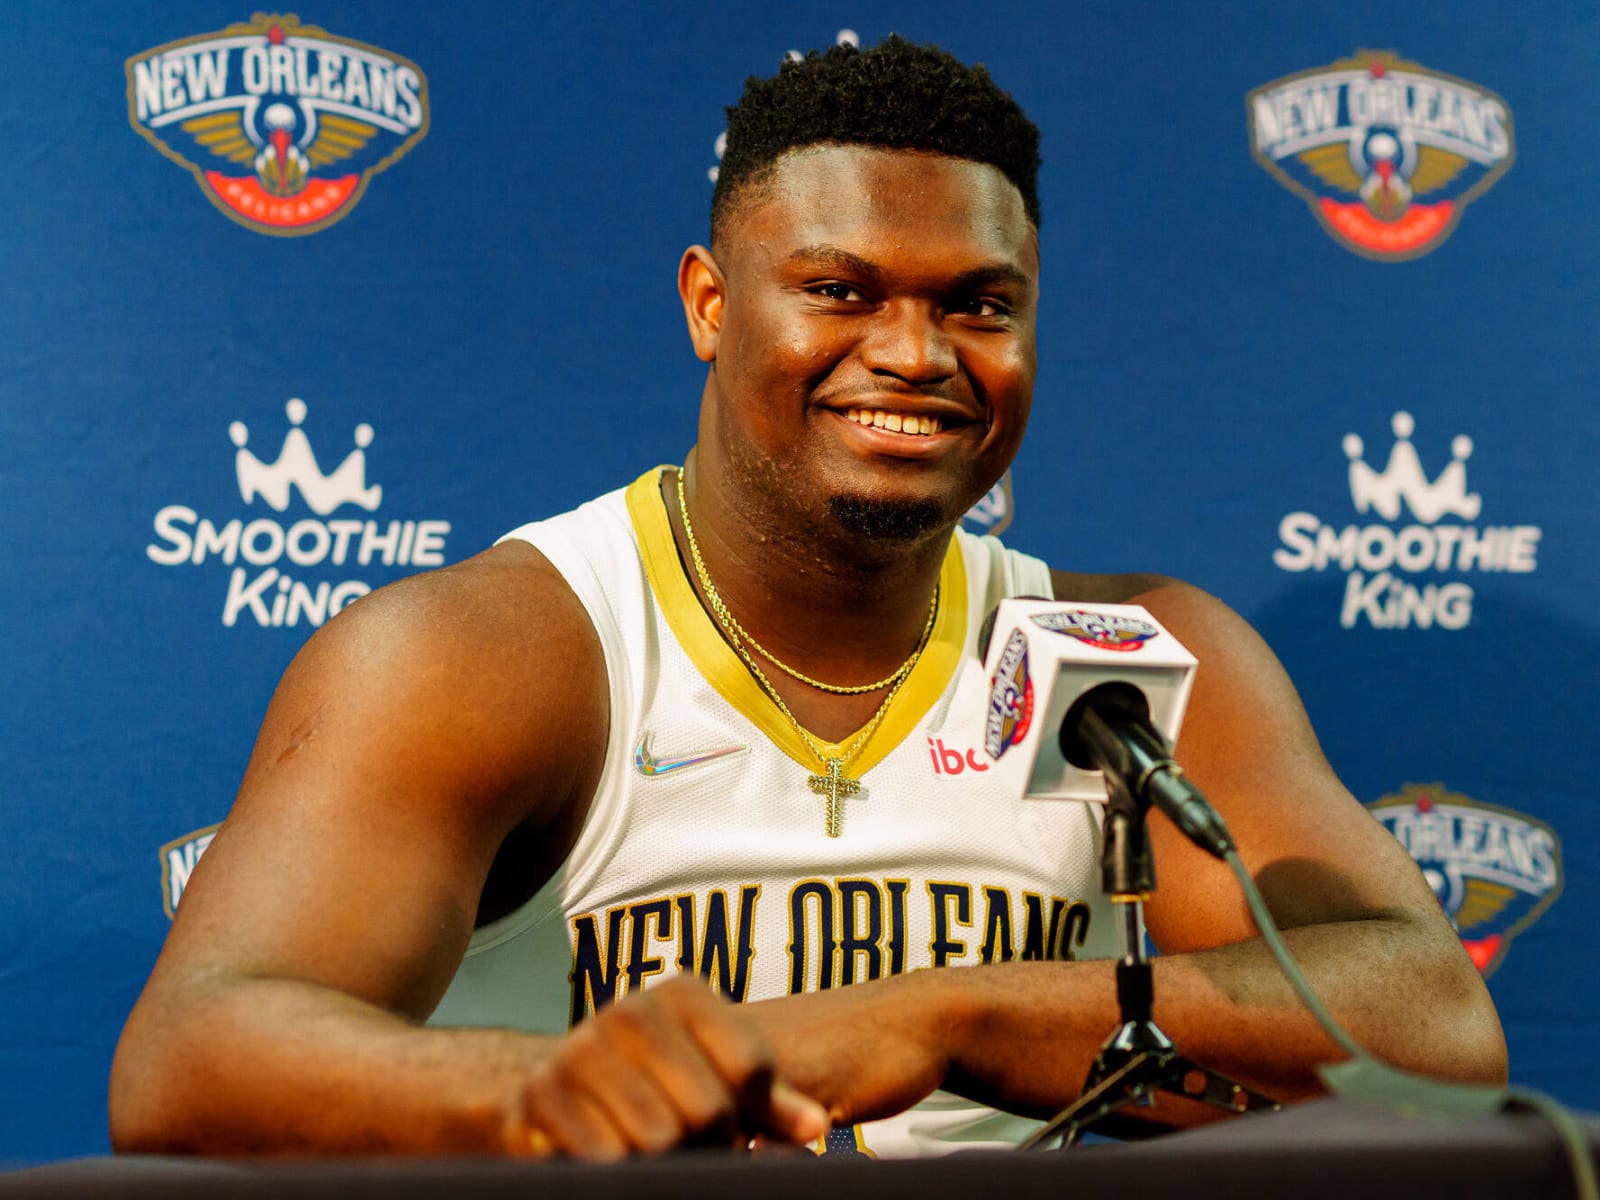 NBA All-Star game: Zion Williamson savaged, 'horrible' moment